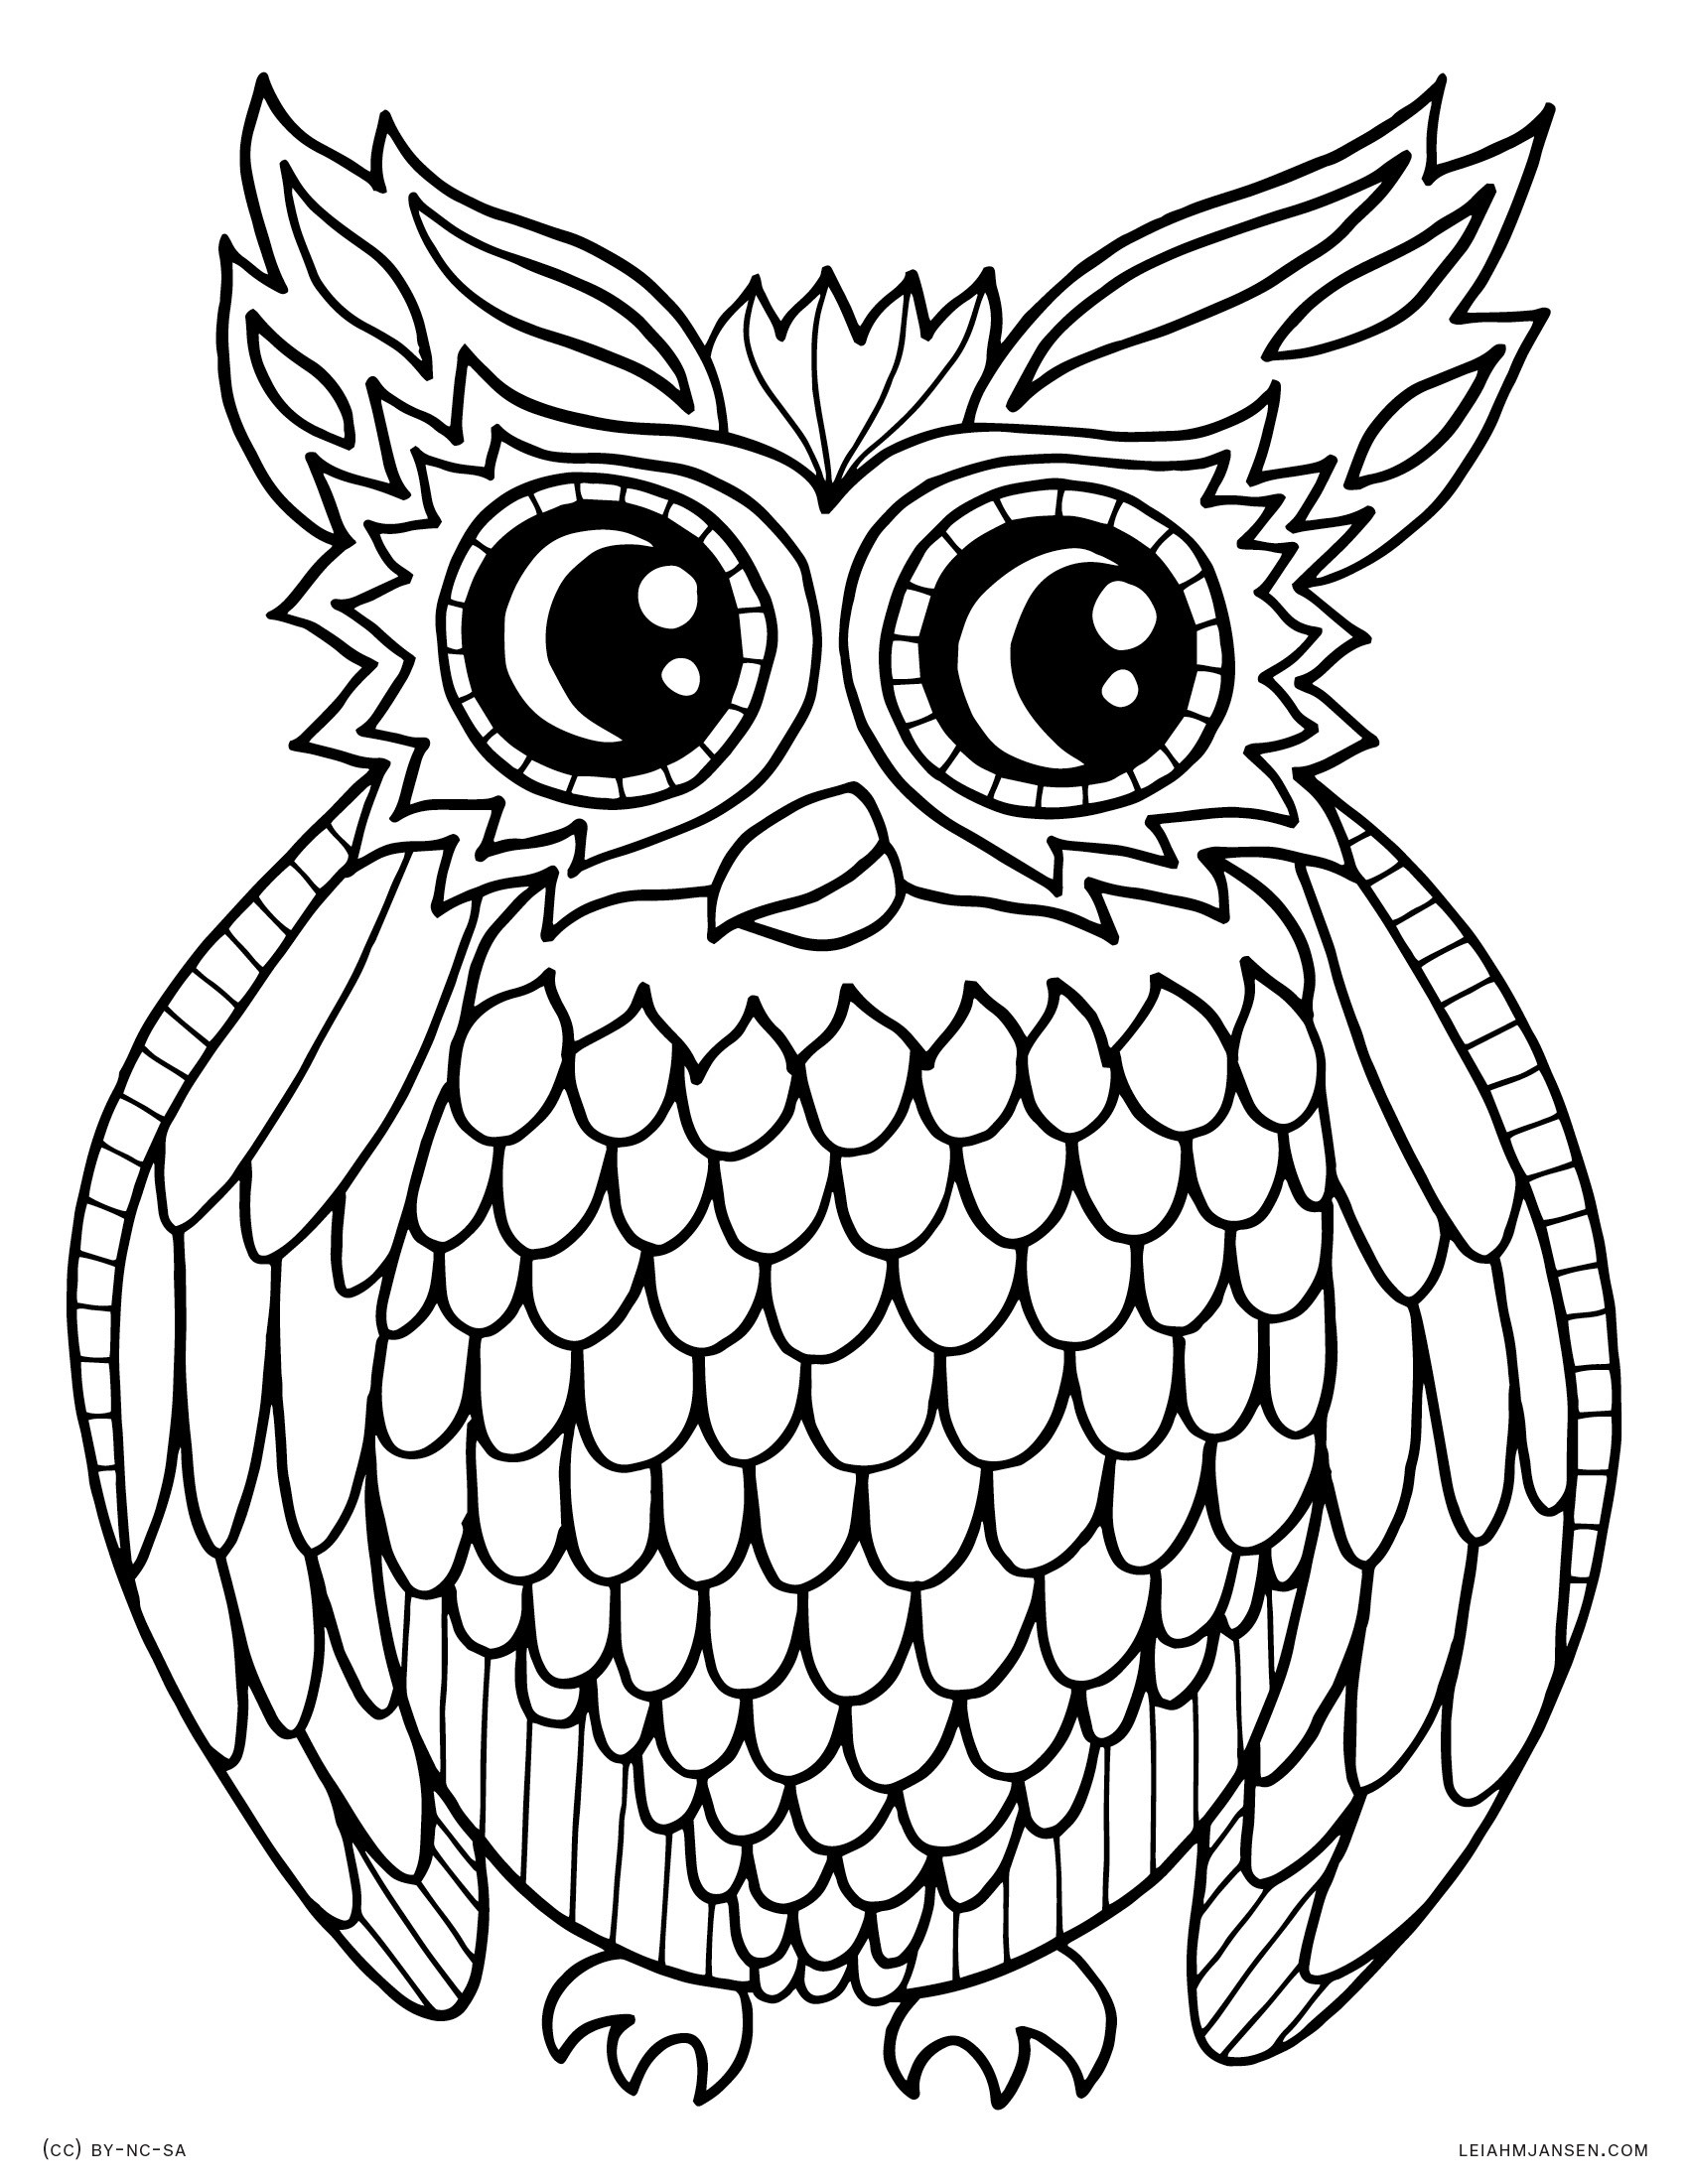 Owl Coloring Pages Printable
 Coloring Pages